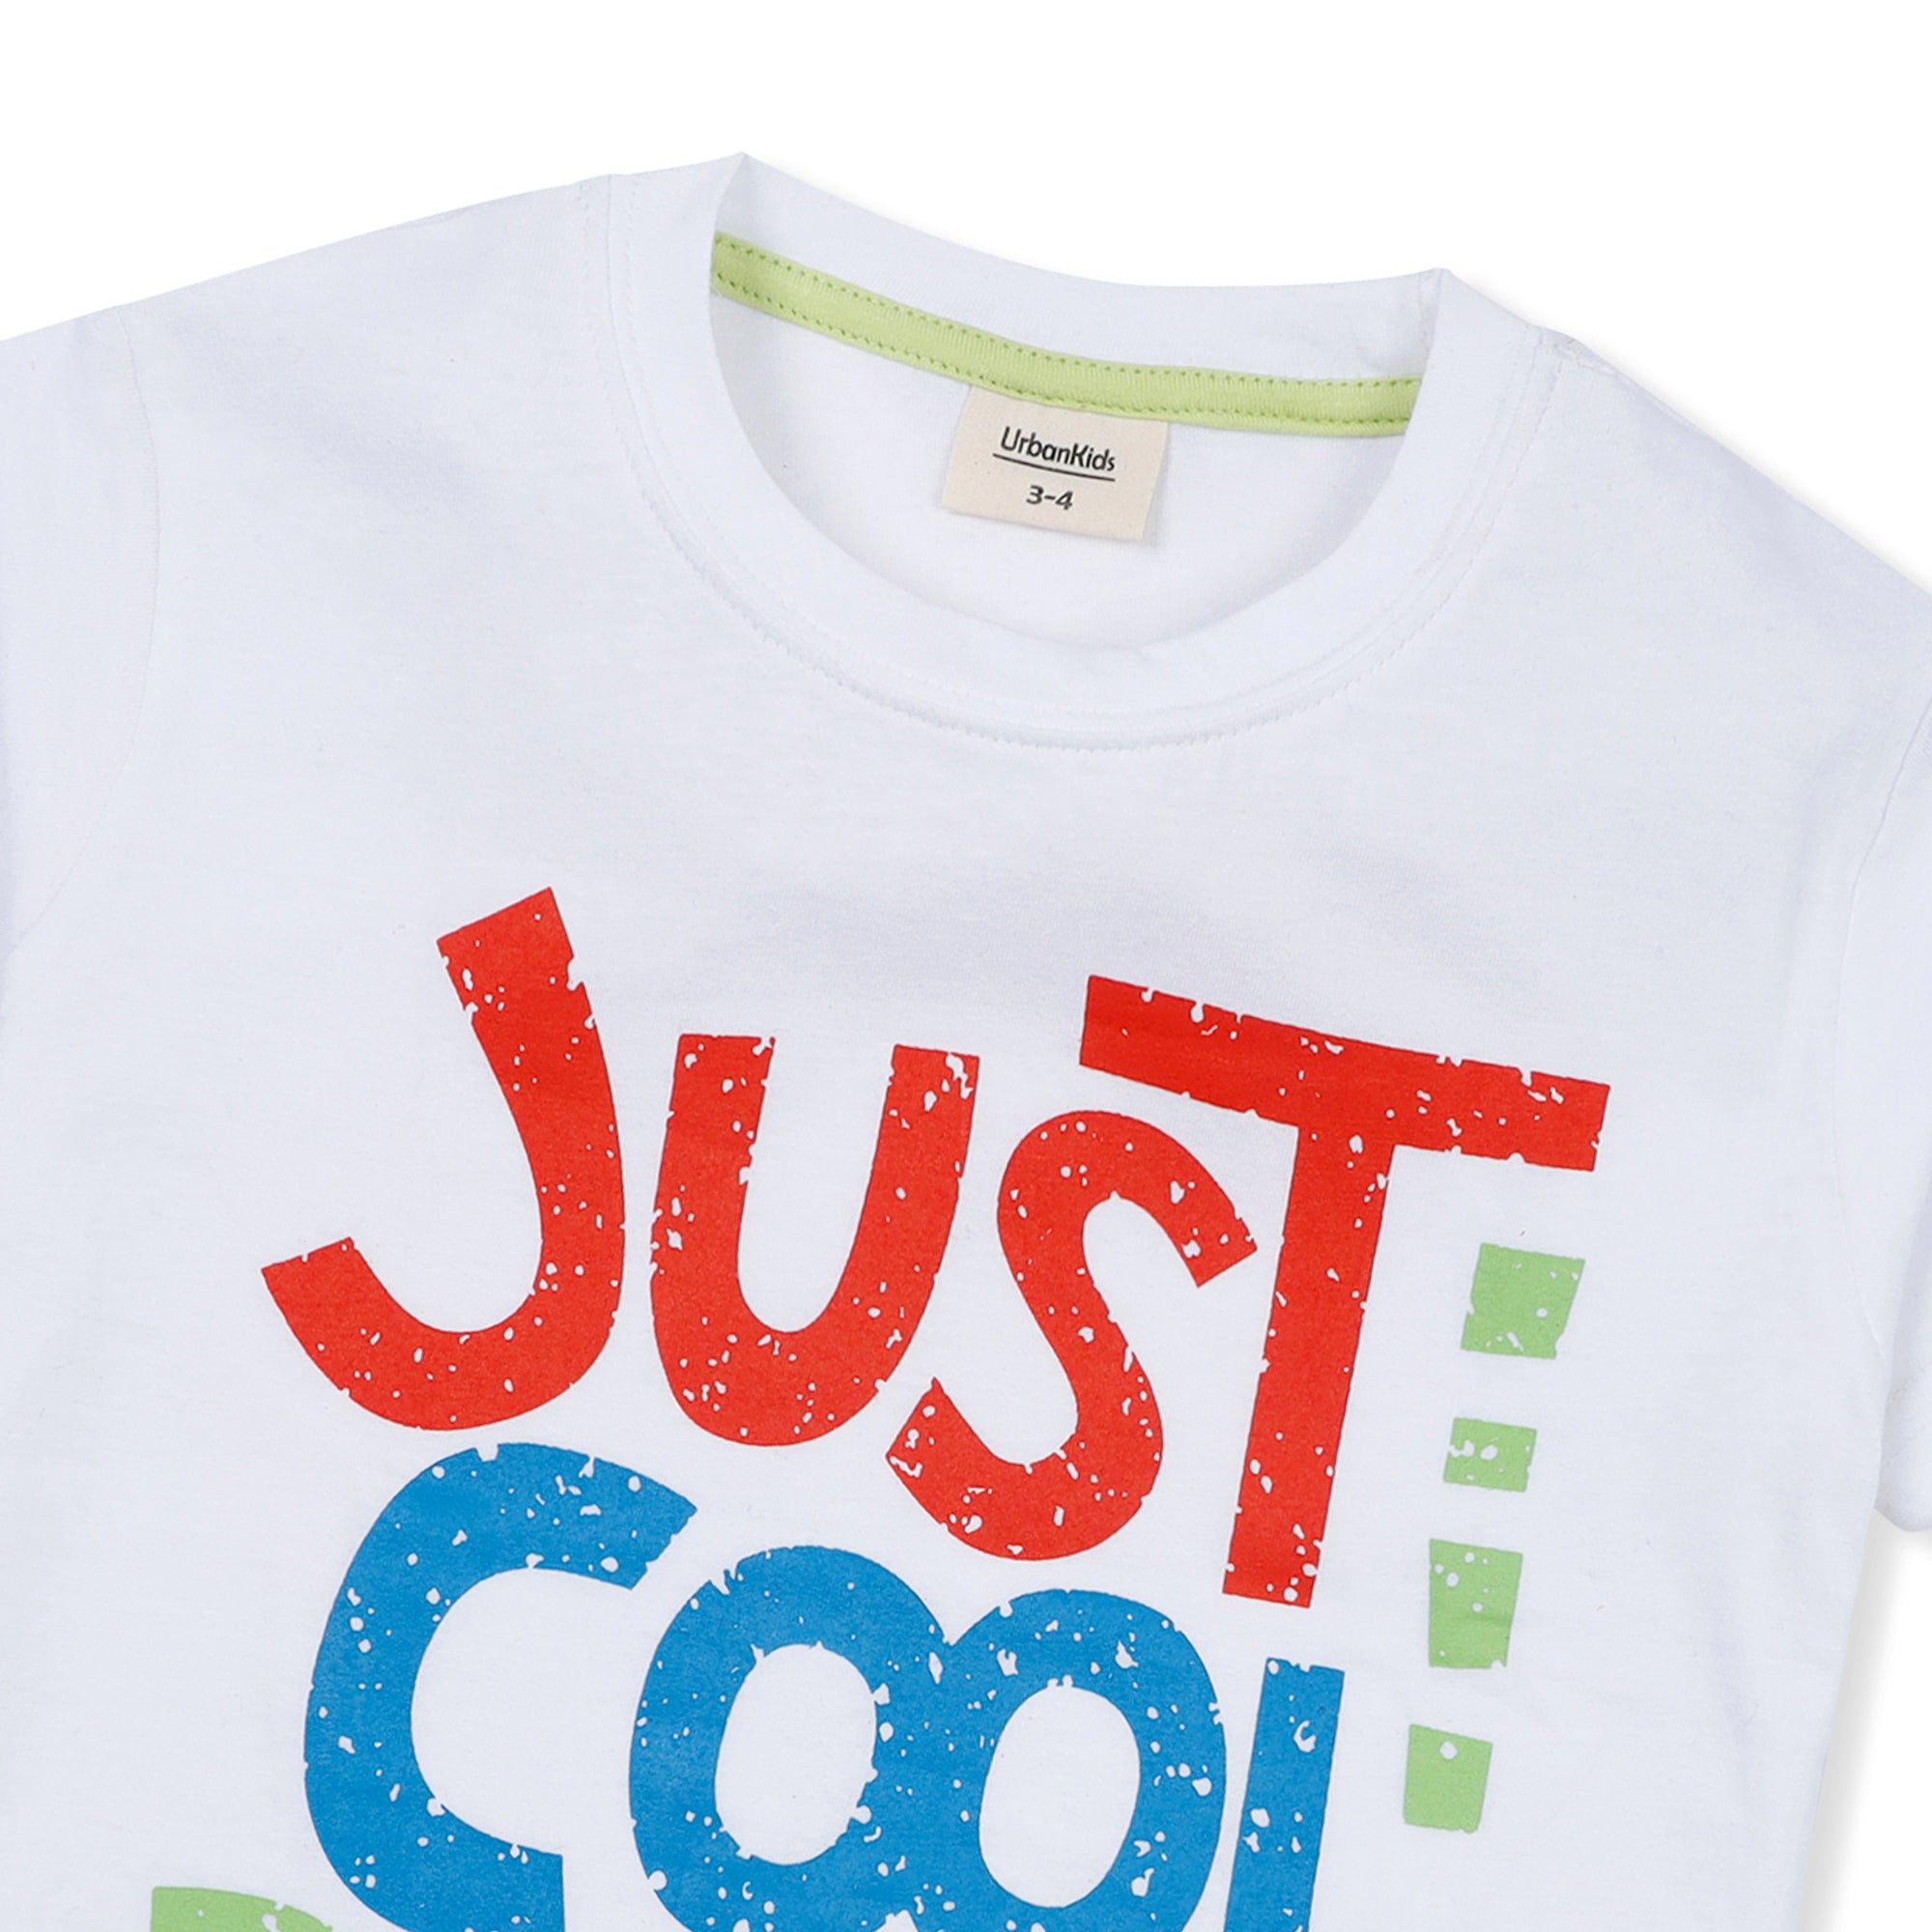 Just Cool Dude T-Shirt